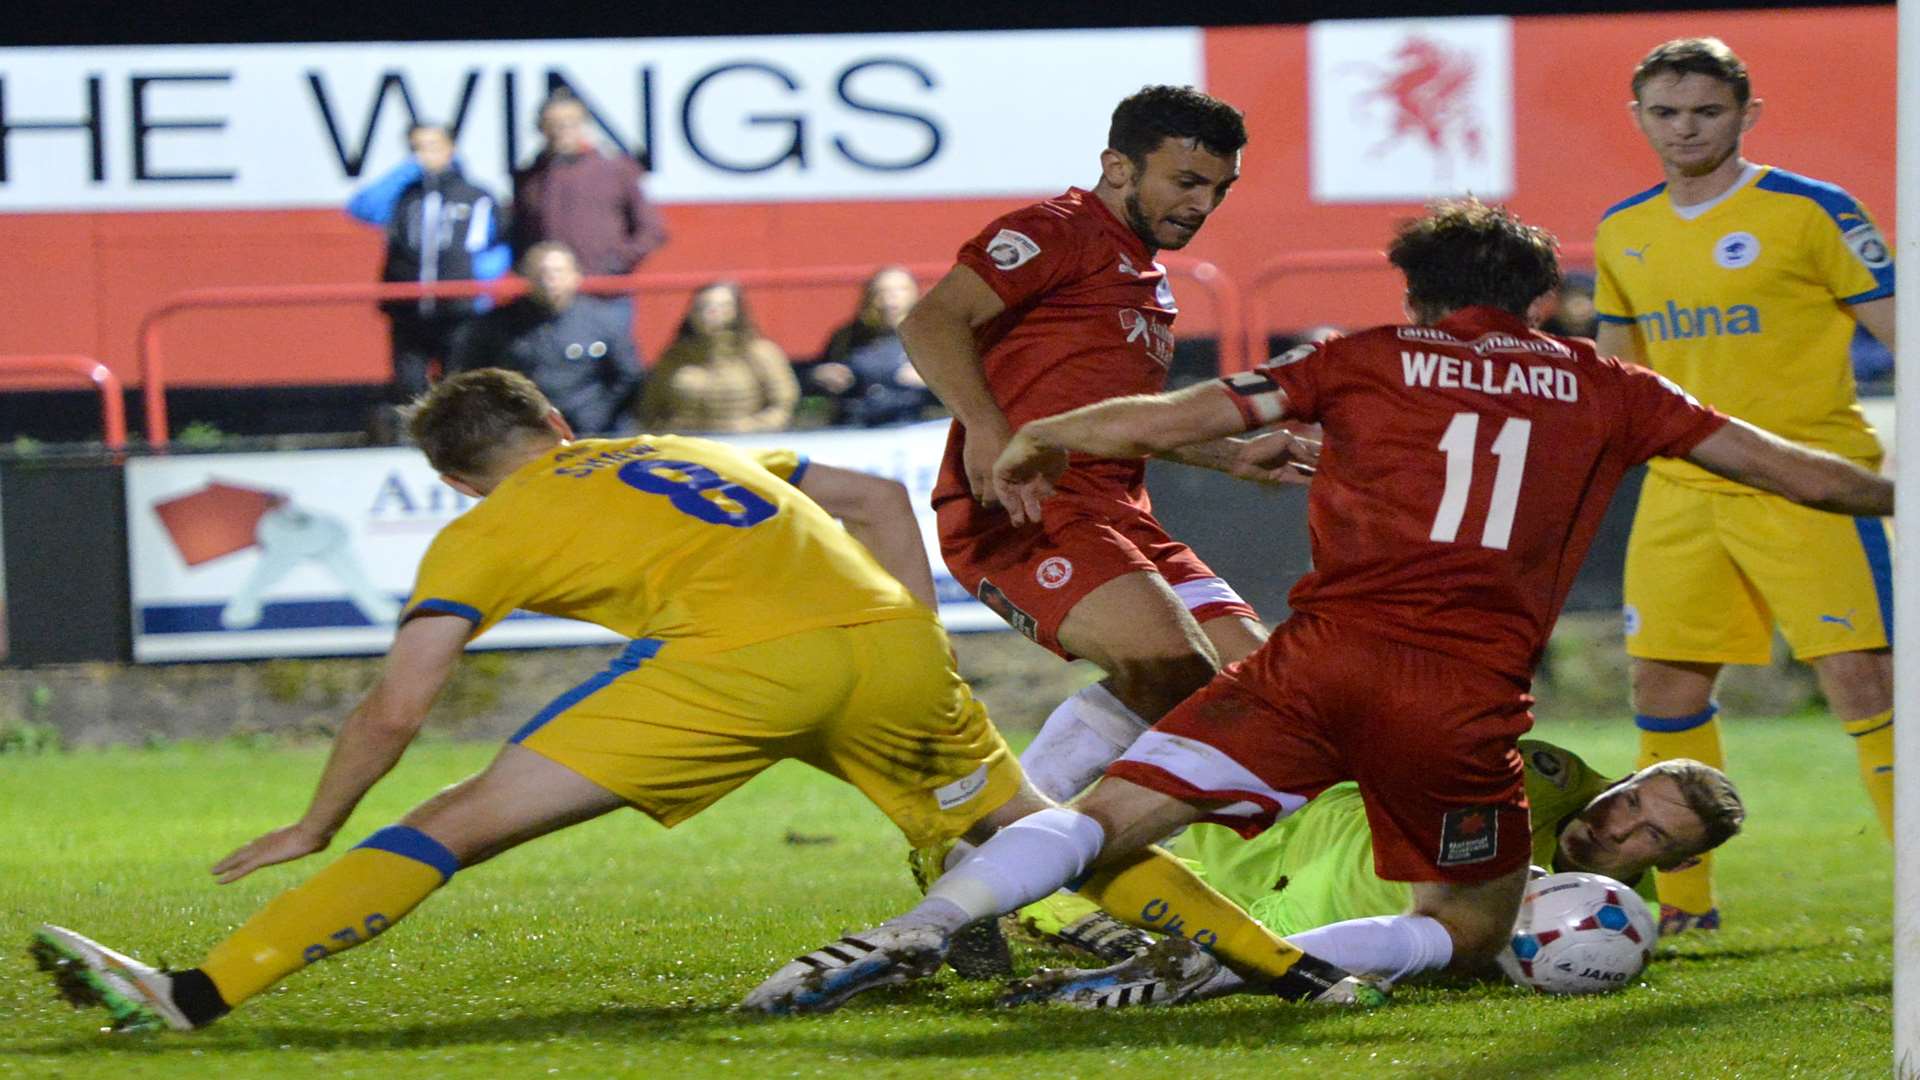 Ricky Wellard puts Welling 2-0 up against Chester. Picture: Keith Gillard